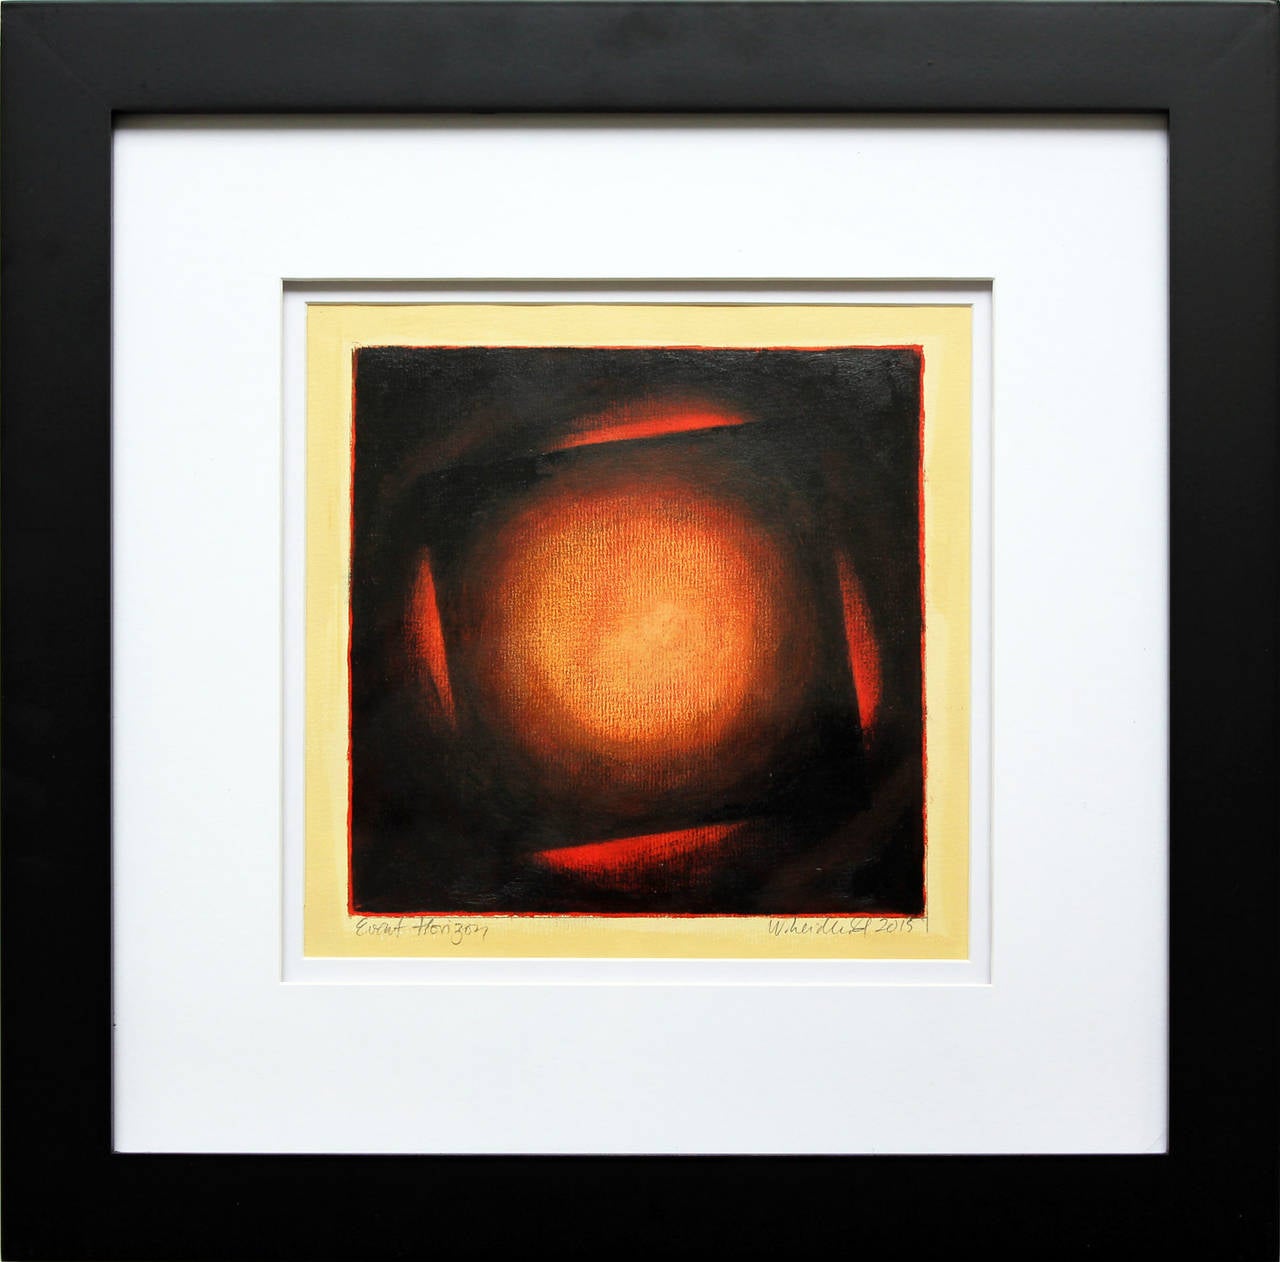 Wolfgang Leidhold Abstract Painting - "Event Horizon" Abstract Geometrical Shape Painting Work on Paper Framed